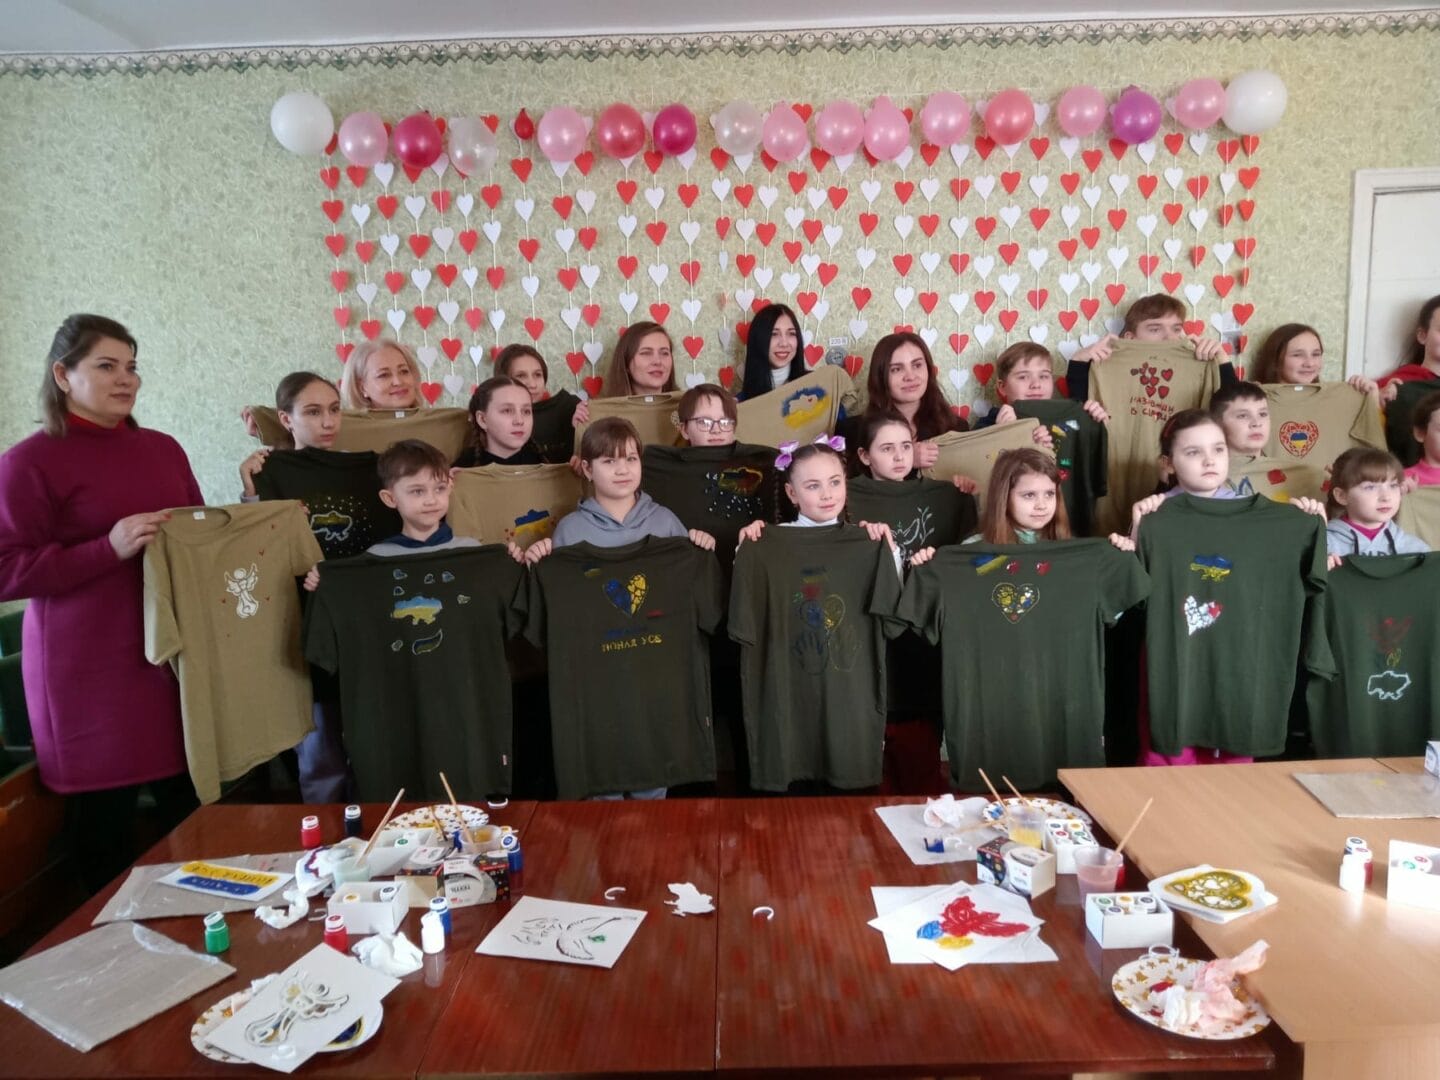 Pupils of the children’s music school holding hand-painted t-shirts for defenders